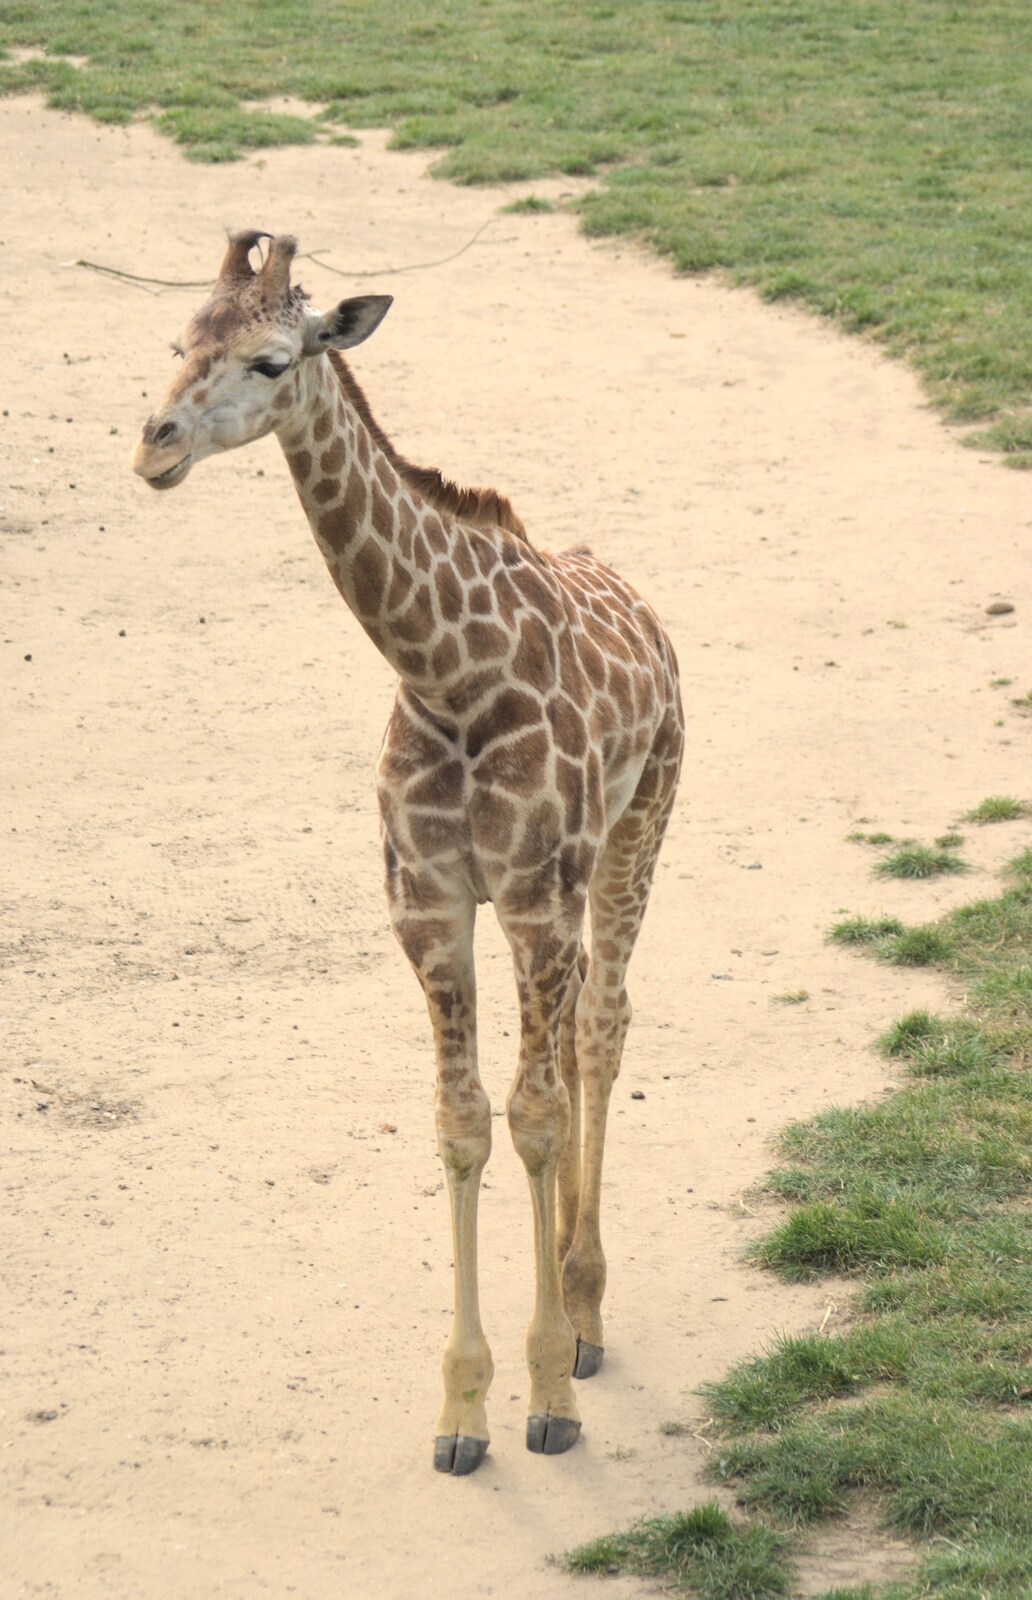 A baby giraffe from Another Day at the Zoo, Banham, Norfolk - 2nd May 2011